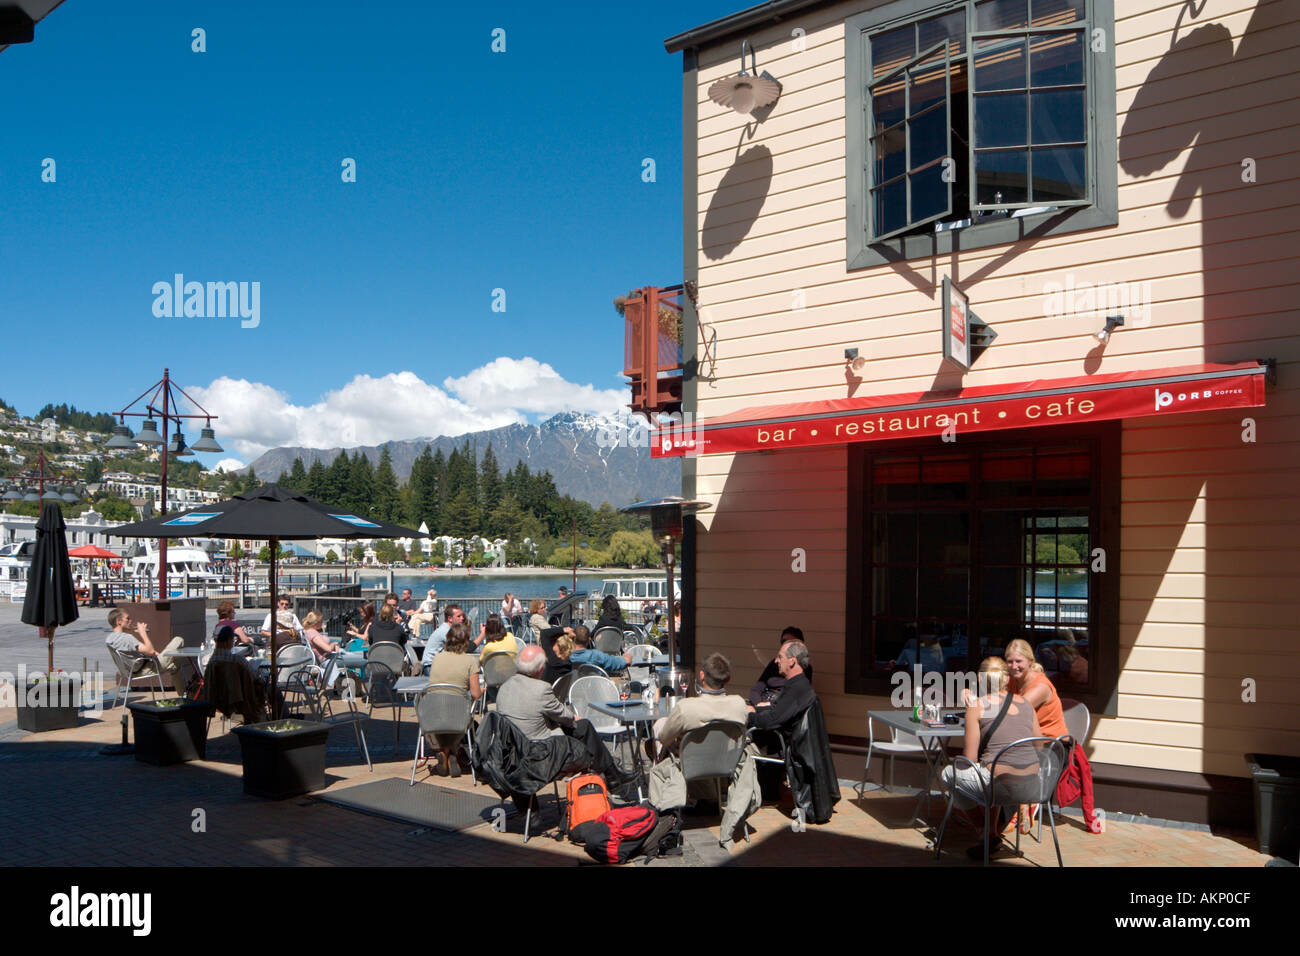 Page 2 - Cafe Bar High Resolution Stock Photography and Images - Alamy